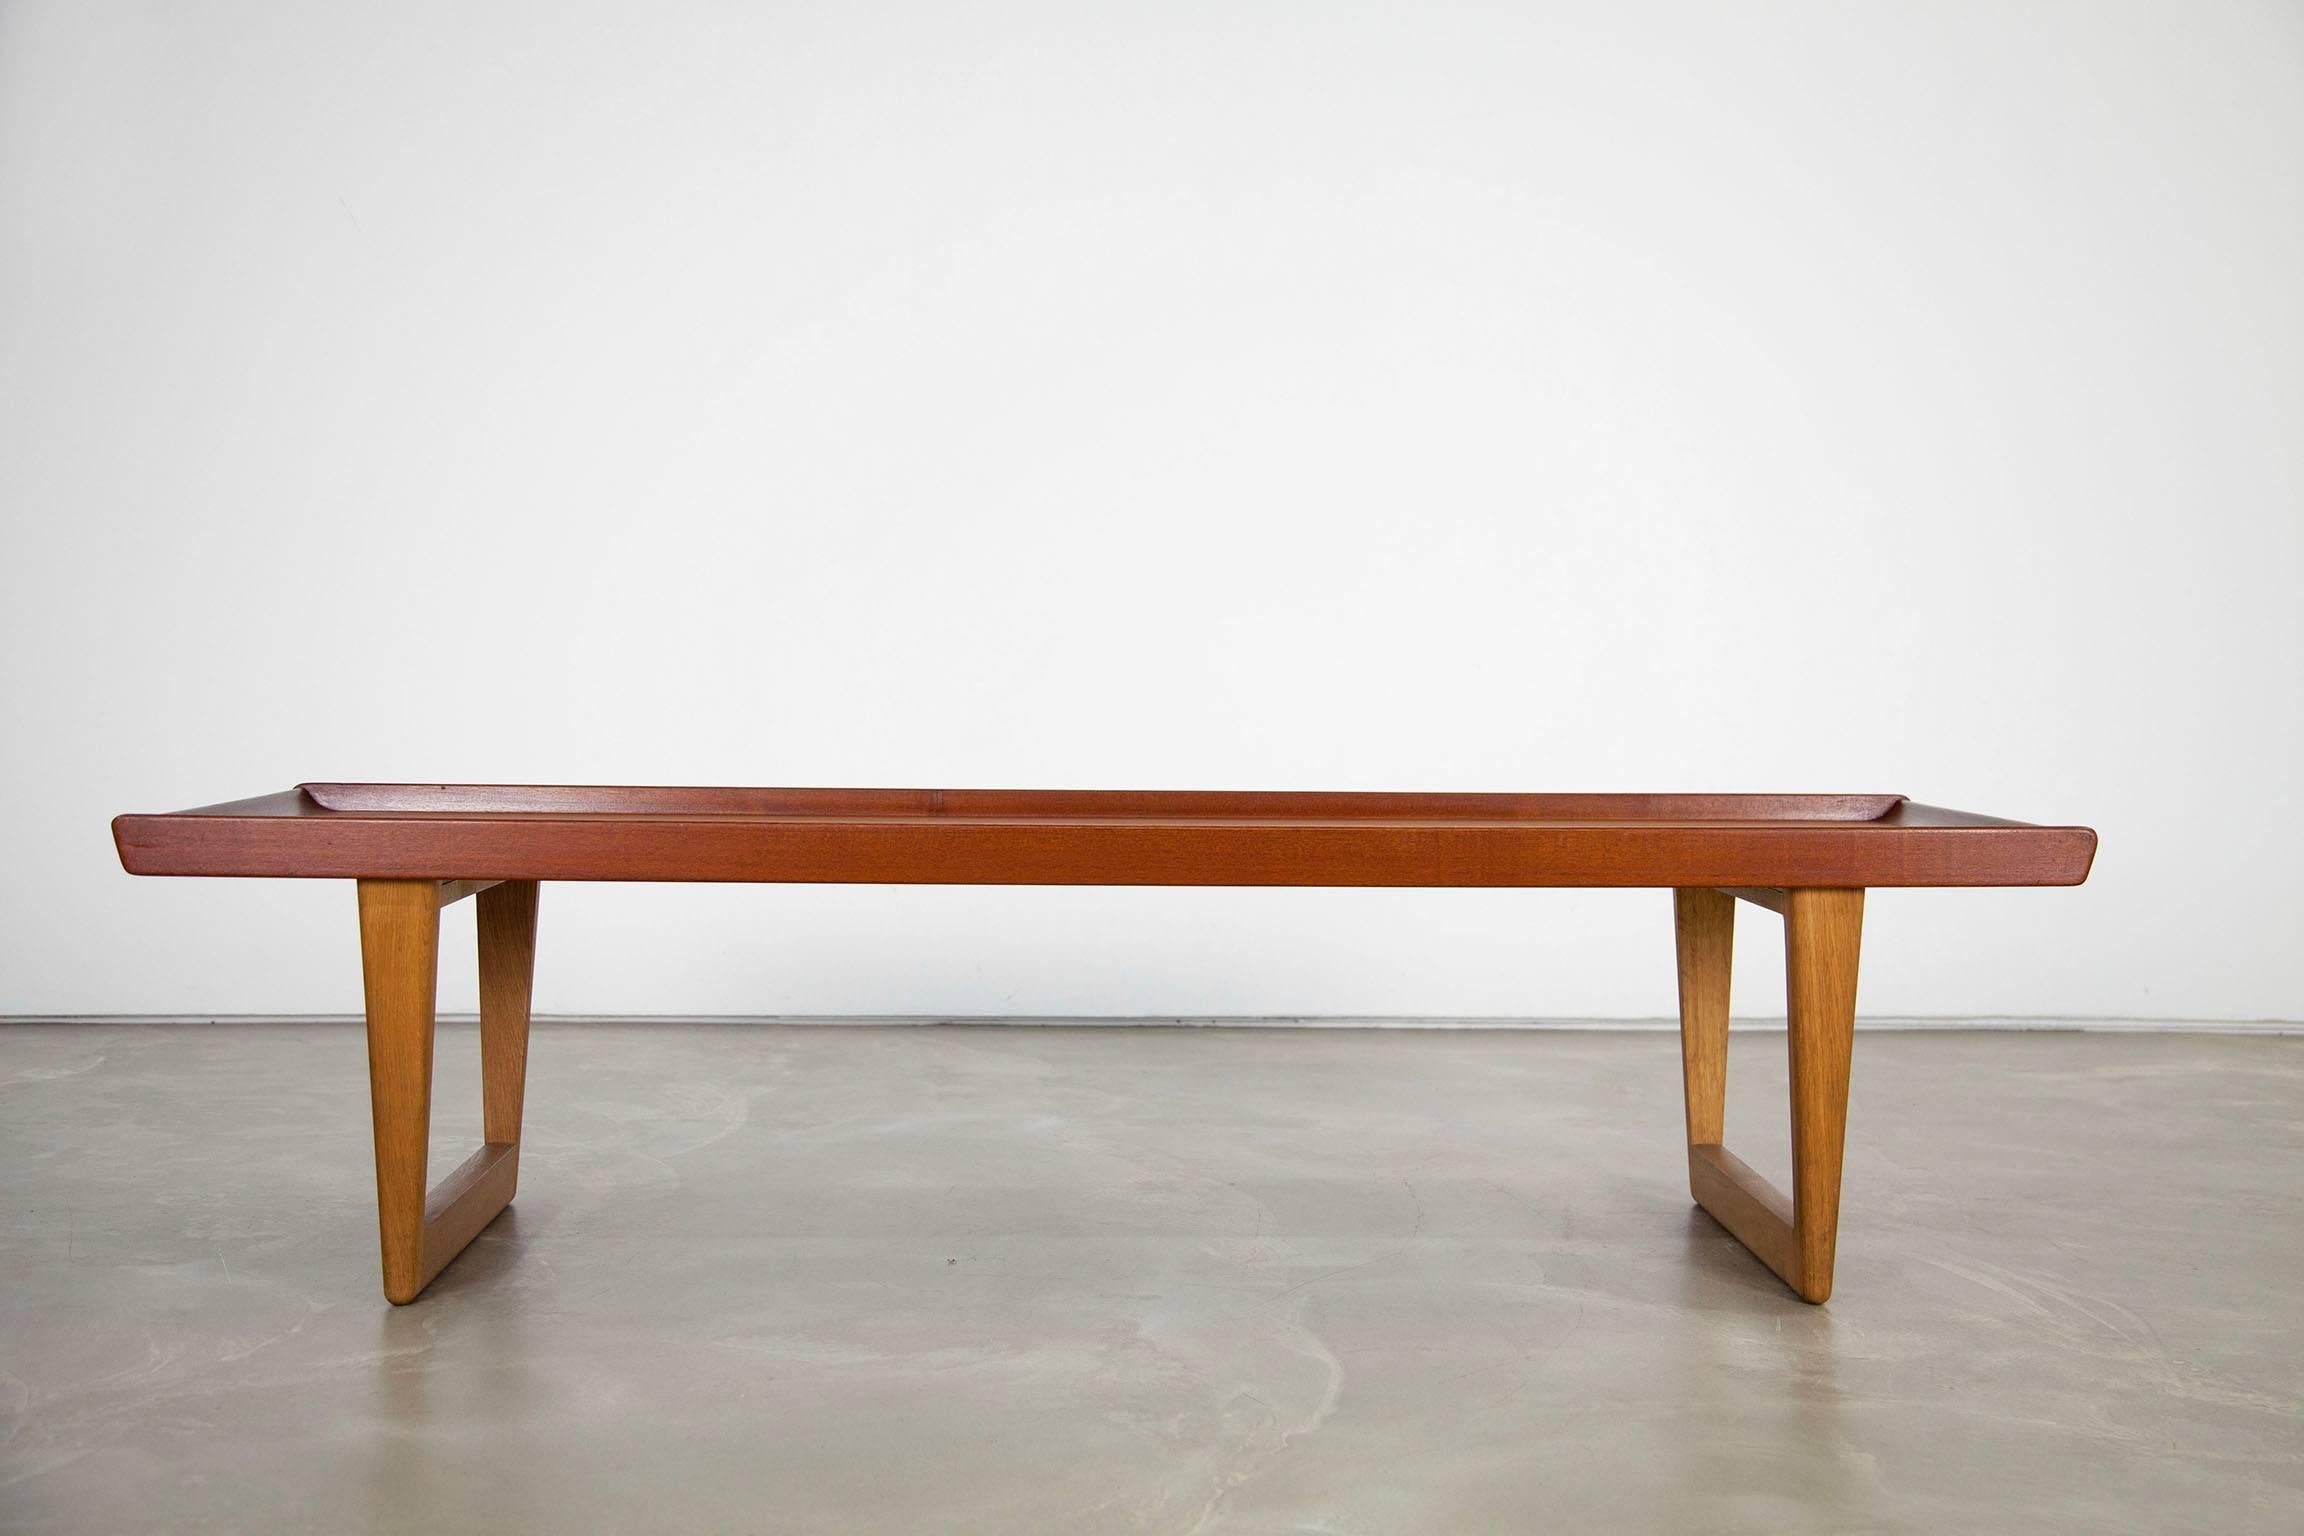 Rare teak coffee table mod. 5251, designed by the Danish designer Børge Mogensen. Beautifully shaped tabletop made of teak with sled legs in oak. Labeled on the bottom. The table is in great state of use.
Dimensions 58 x 182 x 46 cm [D x W x H / T x